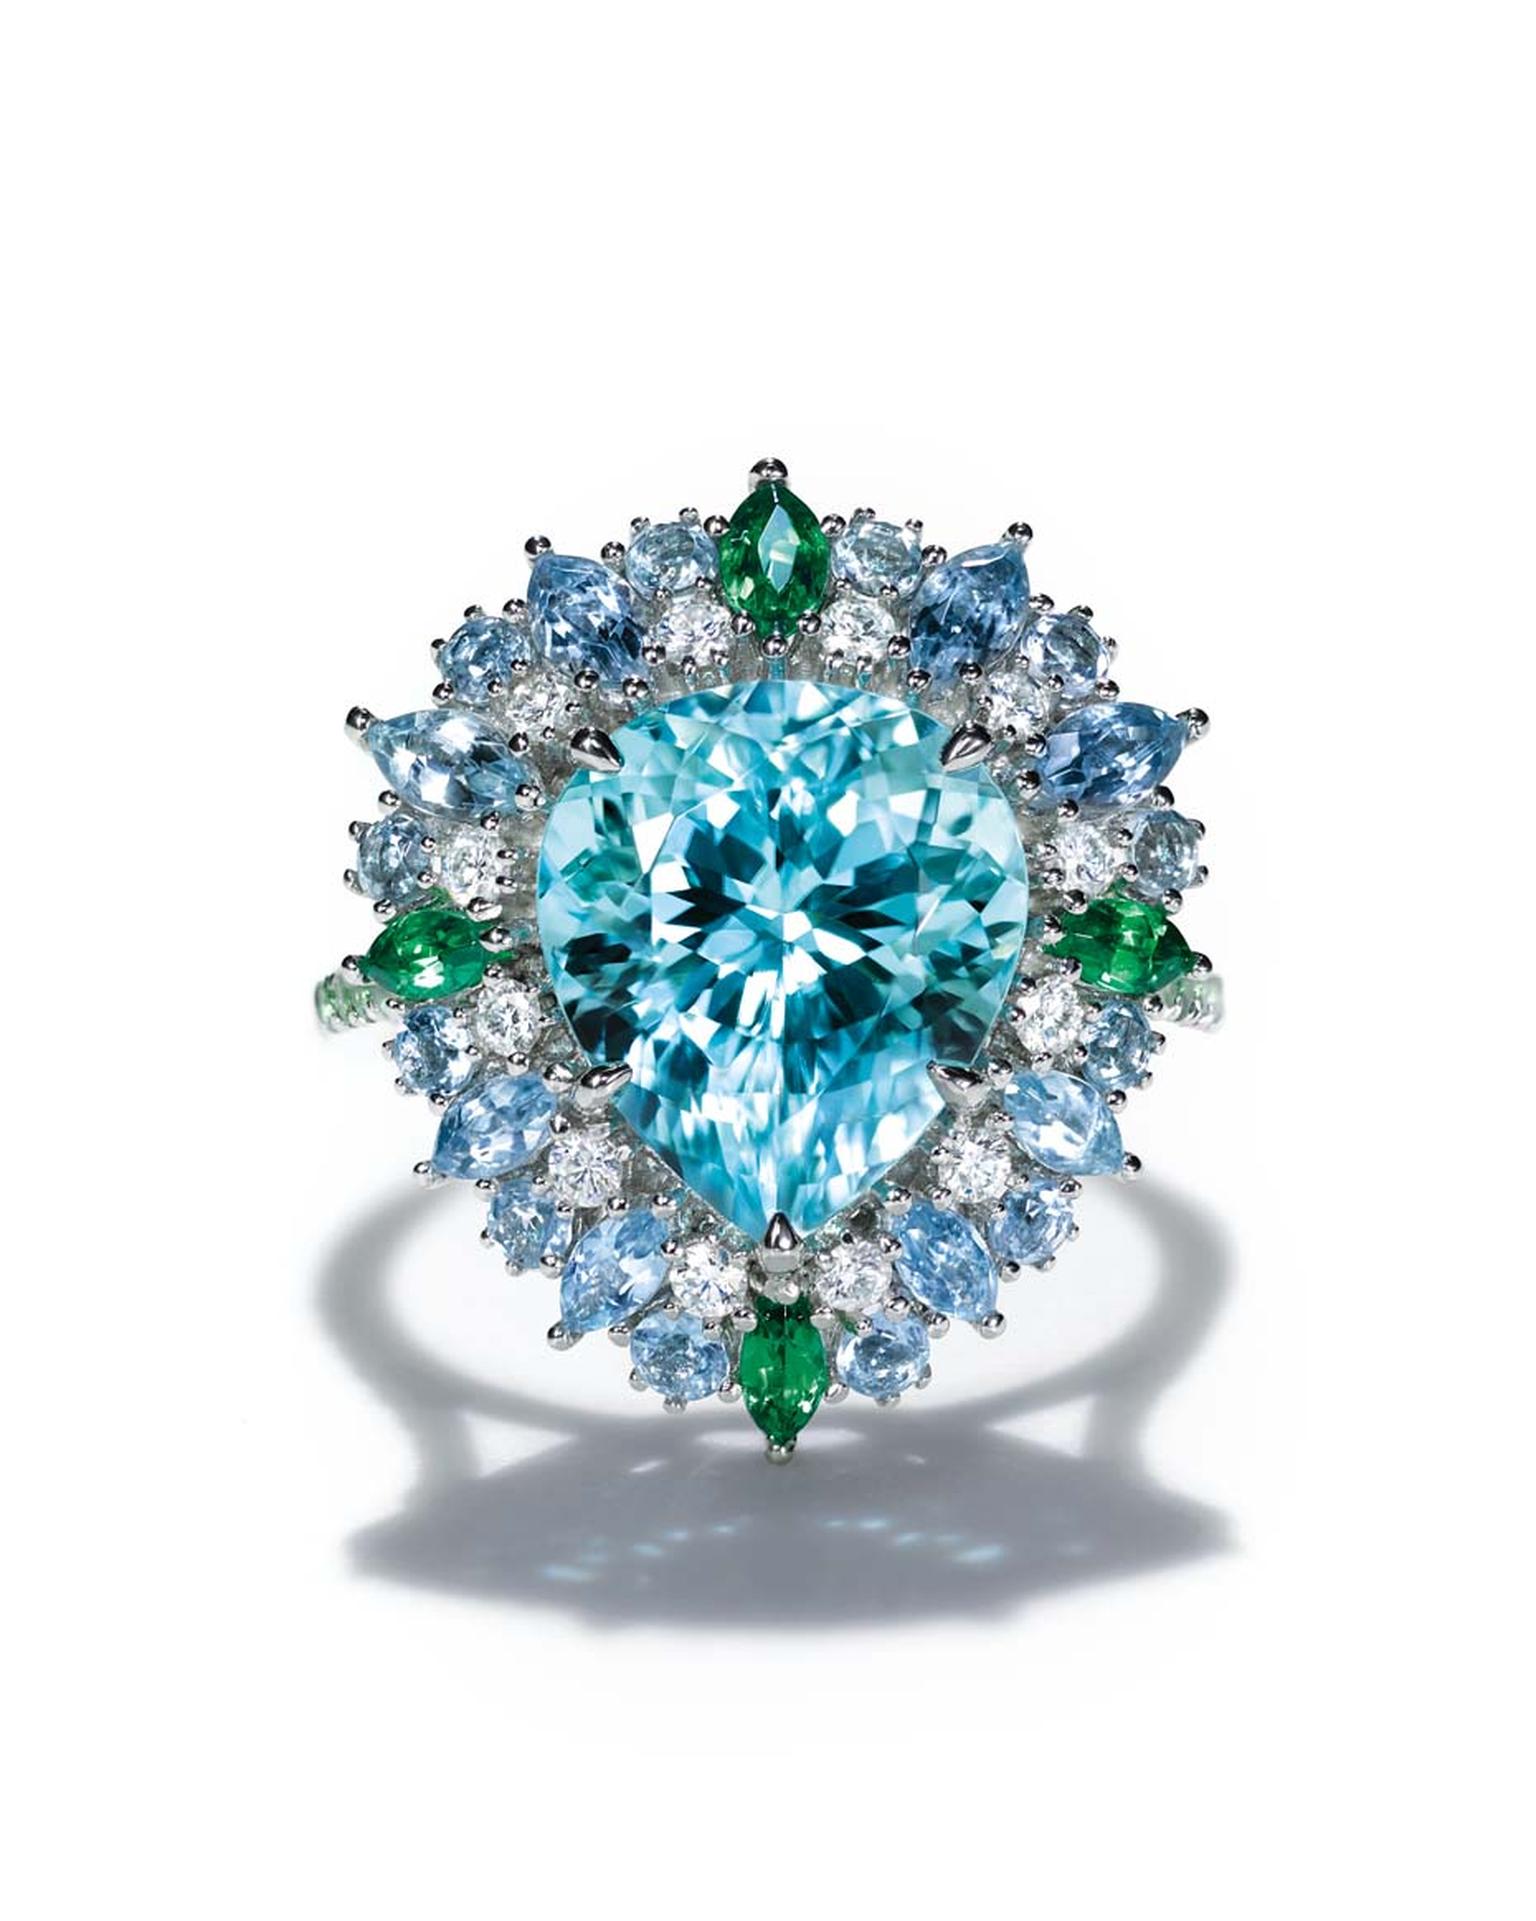 Tiffany ring set with a central 4.42ctt pear-shaped blue cuprian elbaite tourmaline surrounded by aquamarines, tsavorites and diamonds in platinum. From the 2015 Blue Book collection.